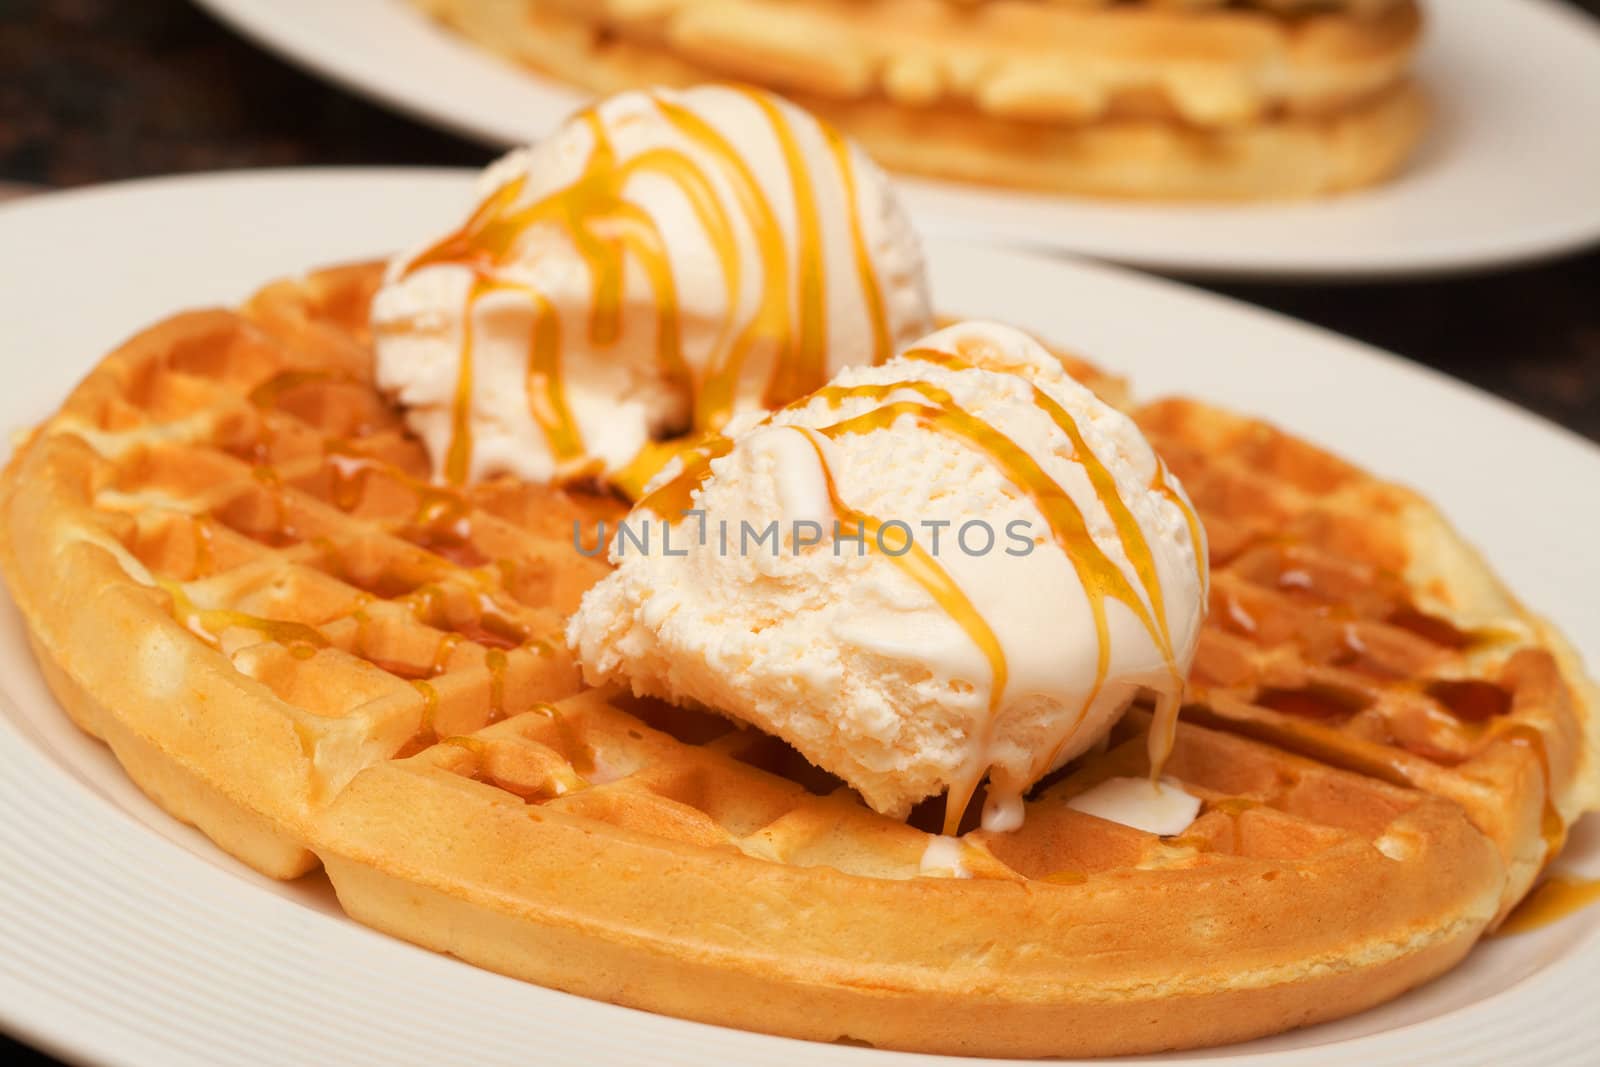 Belgian waffles with ice-cream and syrup by Elenat